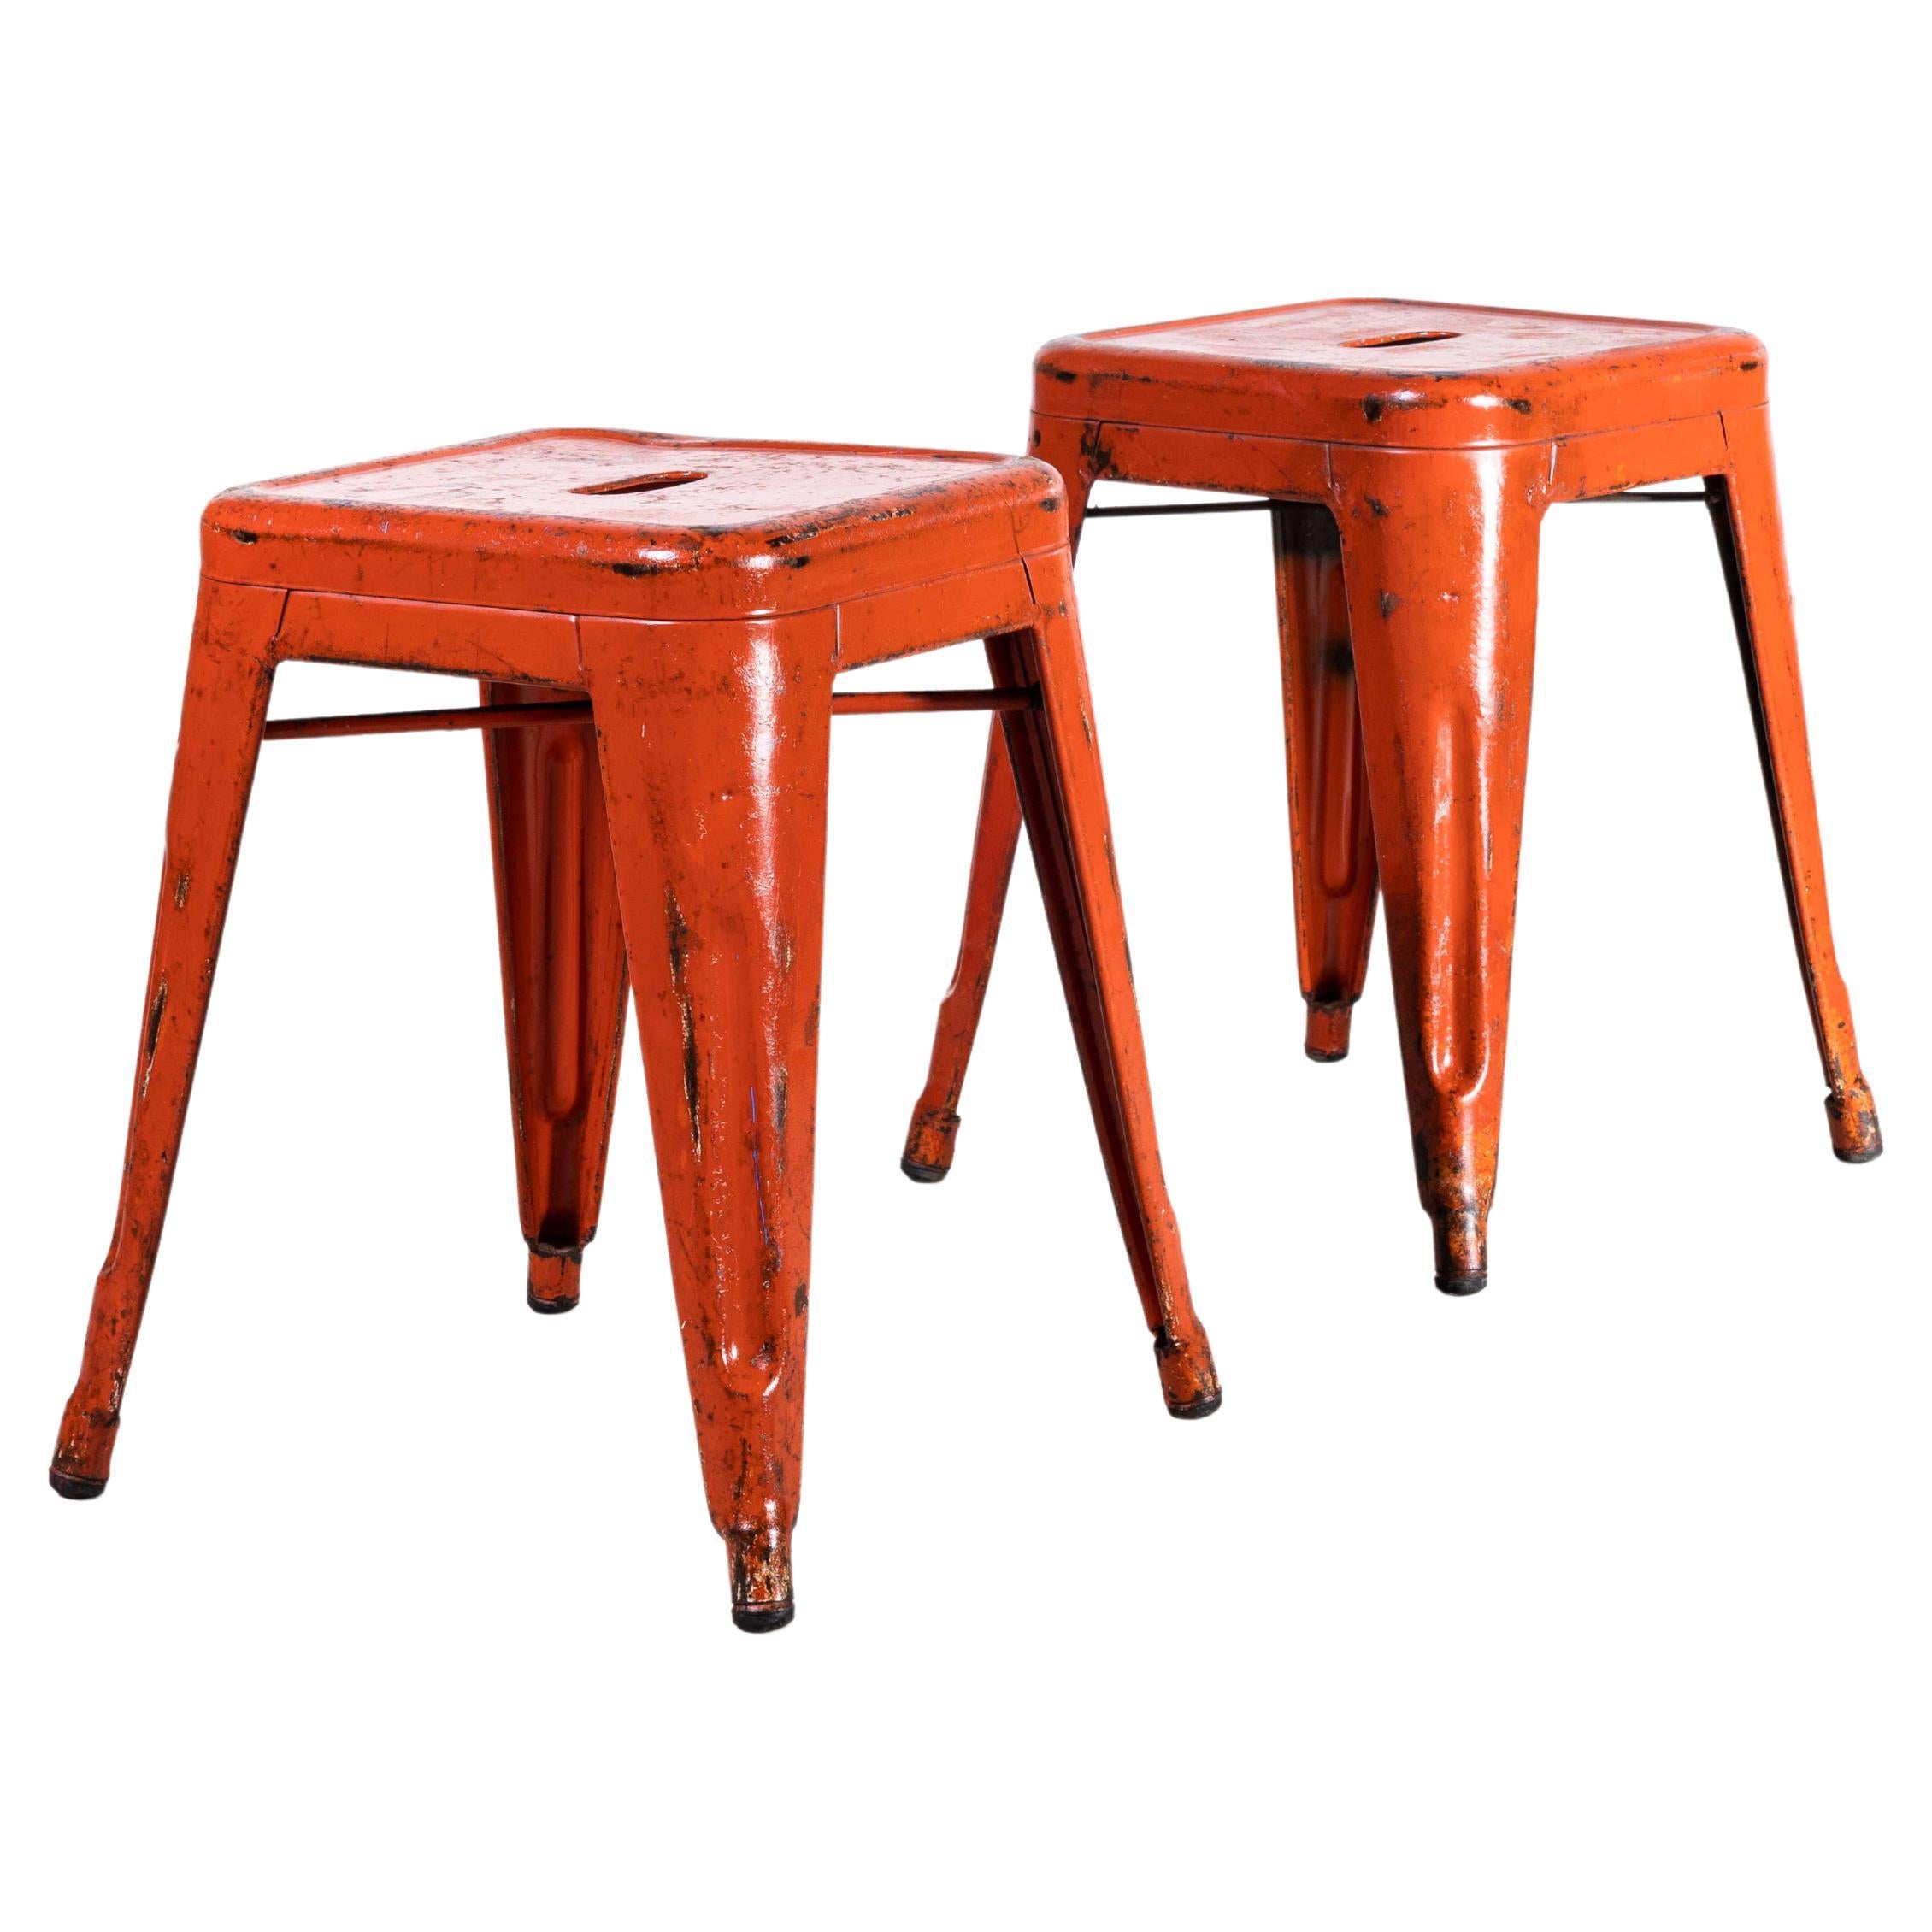 1950's Original French Tolix H Metal Café Dining Stools Red, Pair For Sale